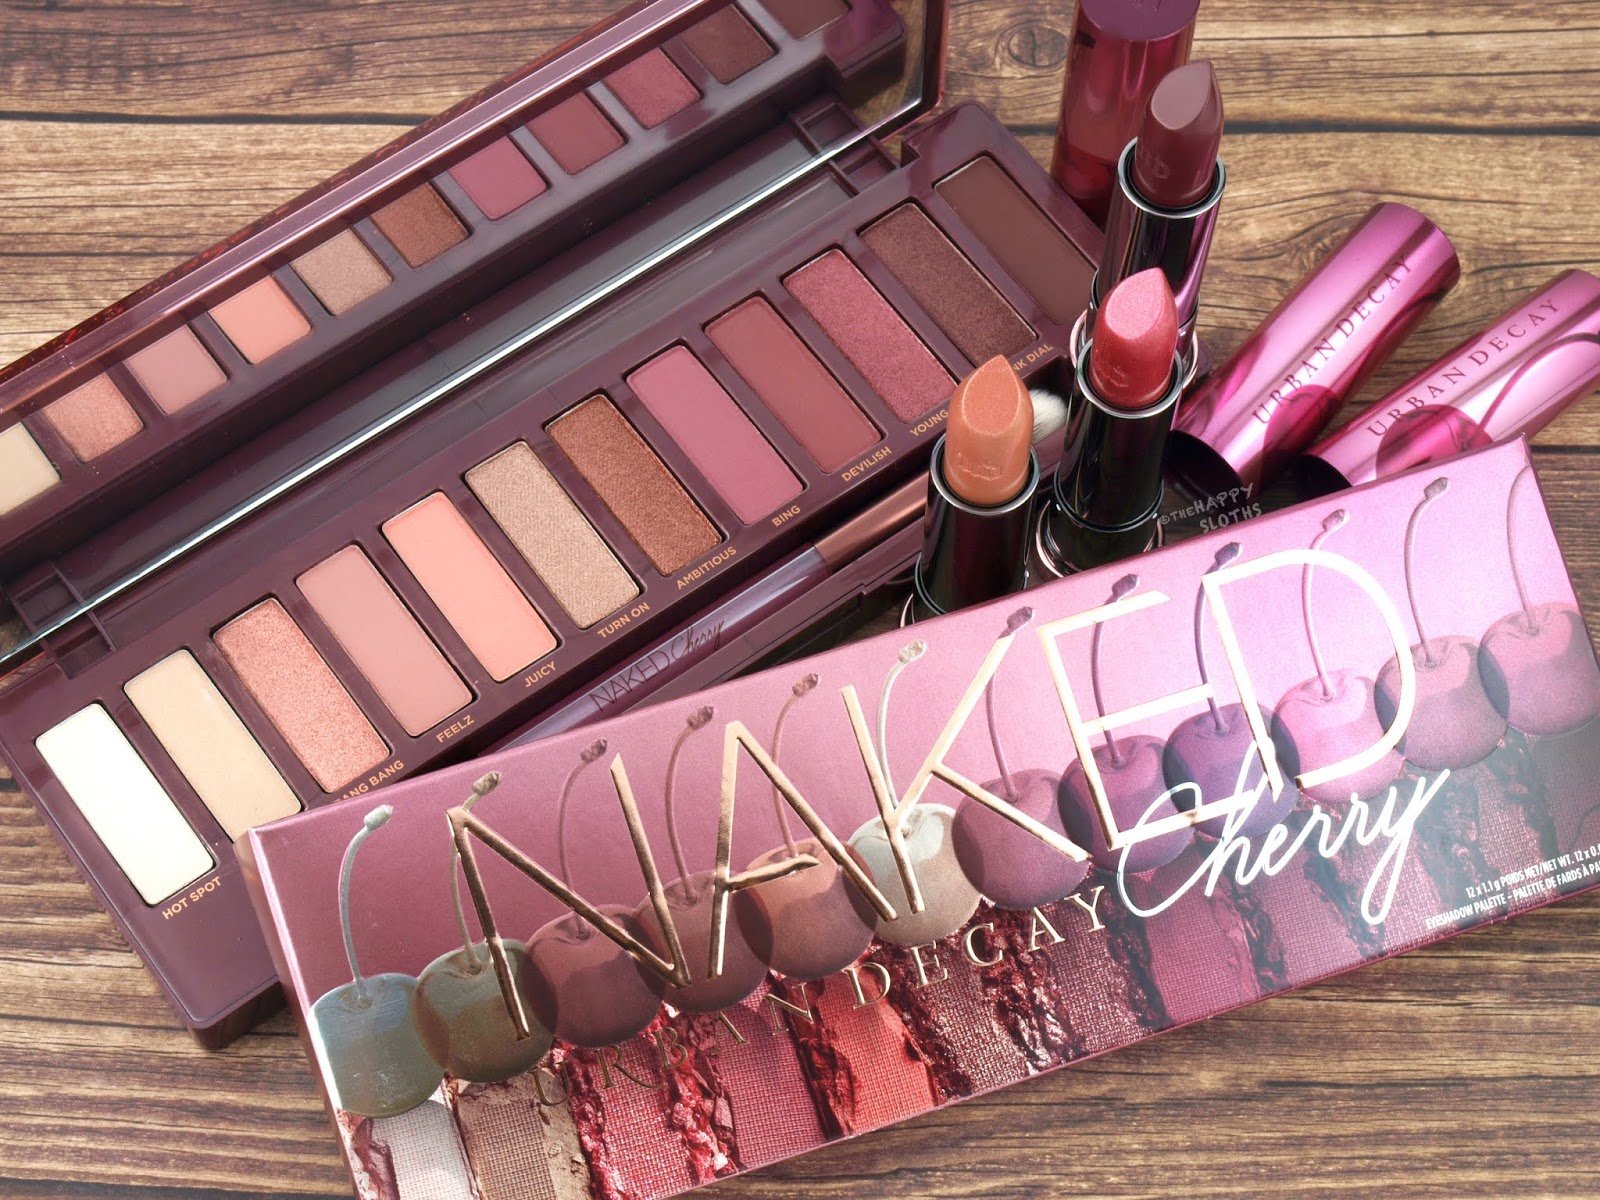 Urban Decay | Naked Cherry Collection: Review and Swatches